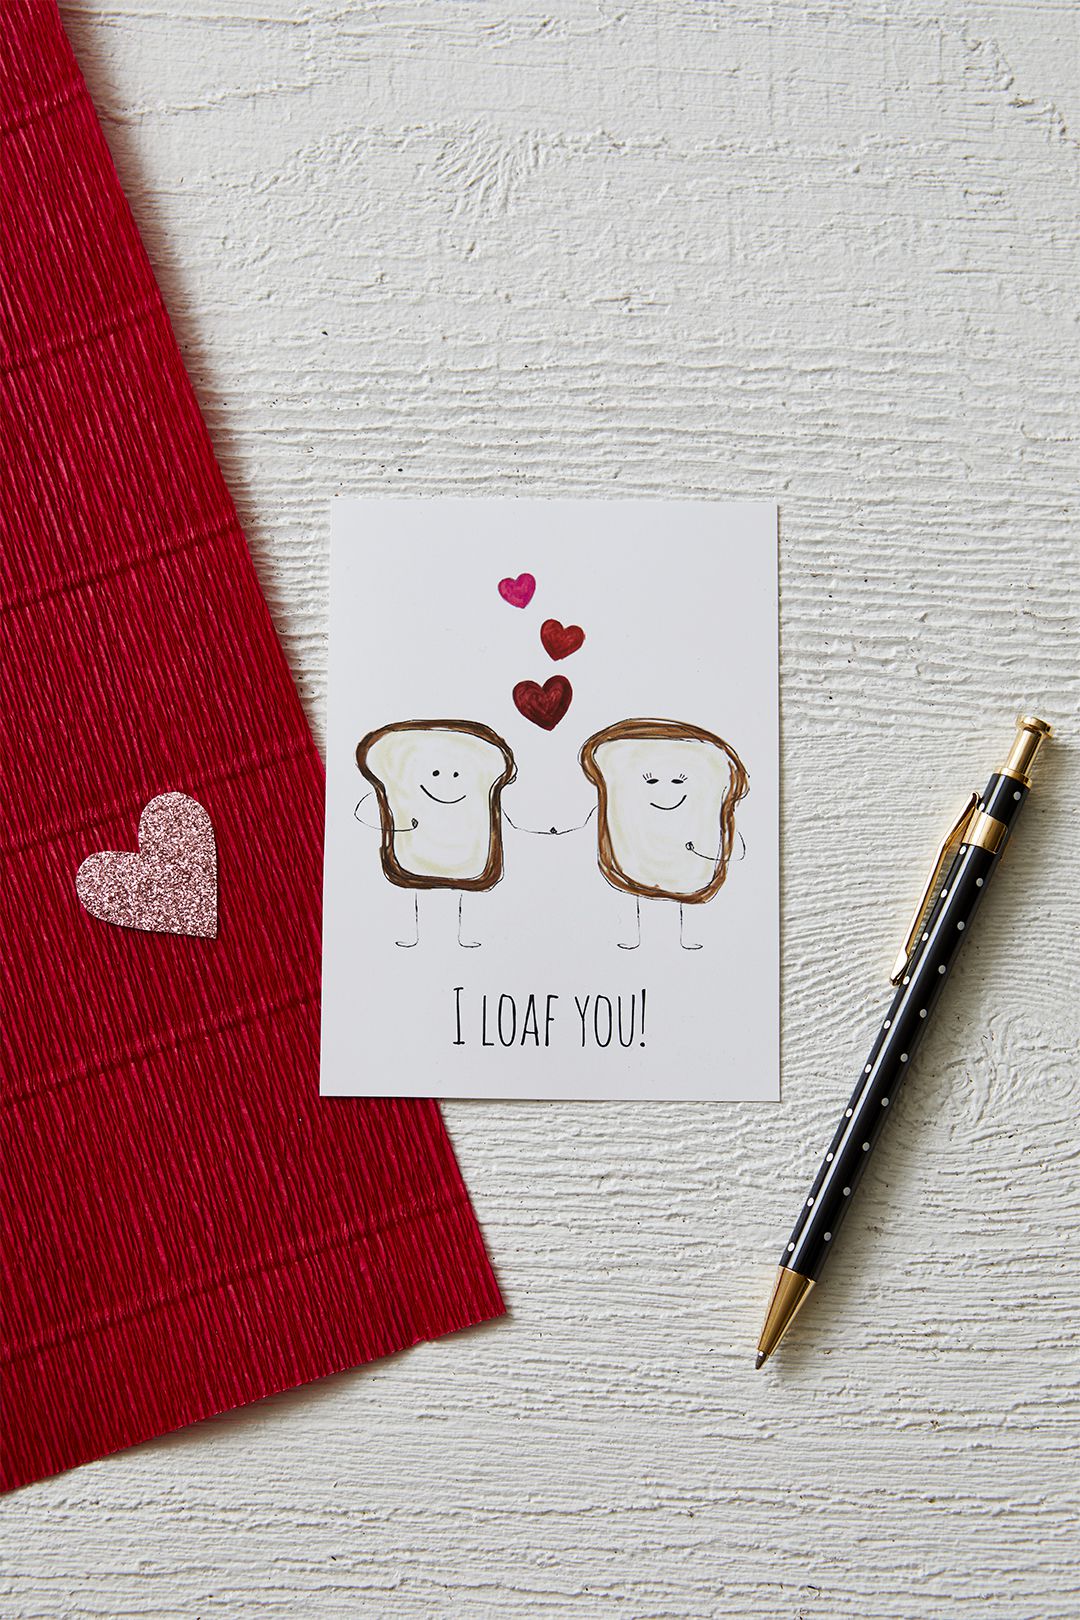 Free printable valentine cards that will make your loved ones smile